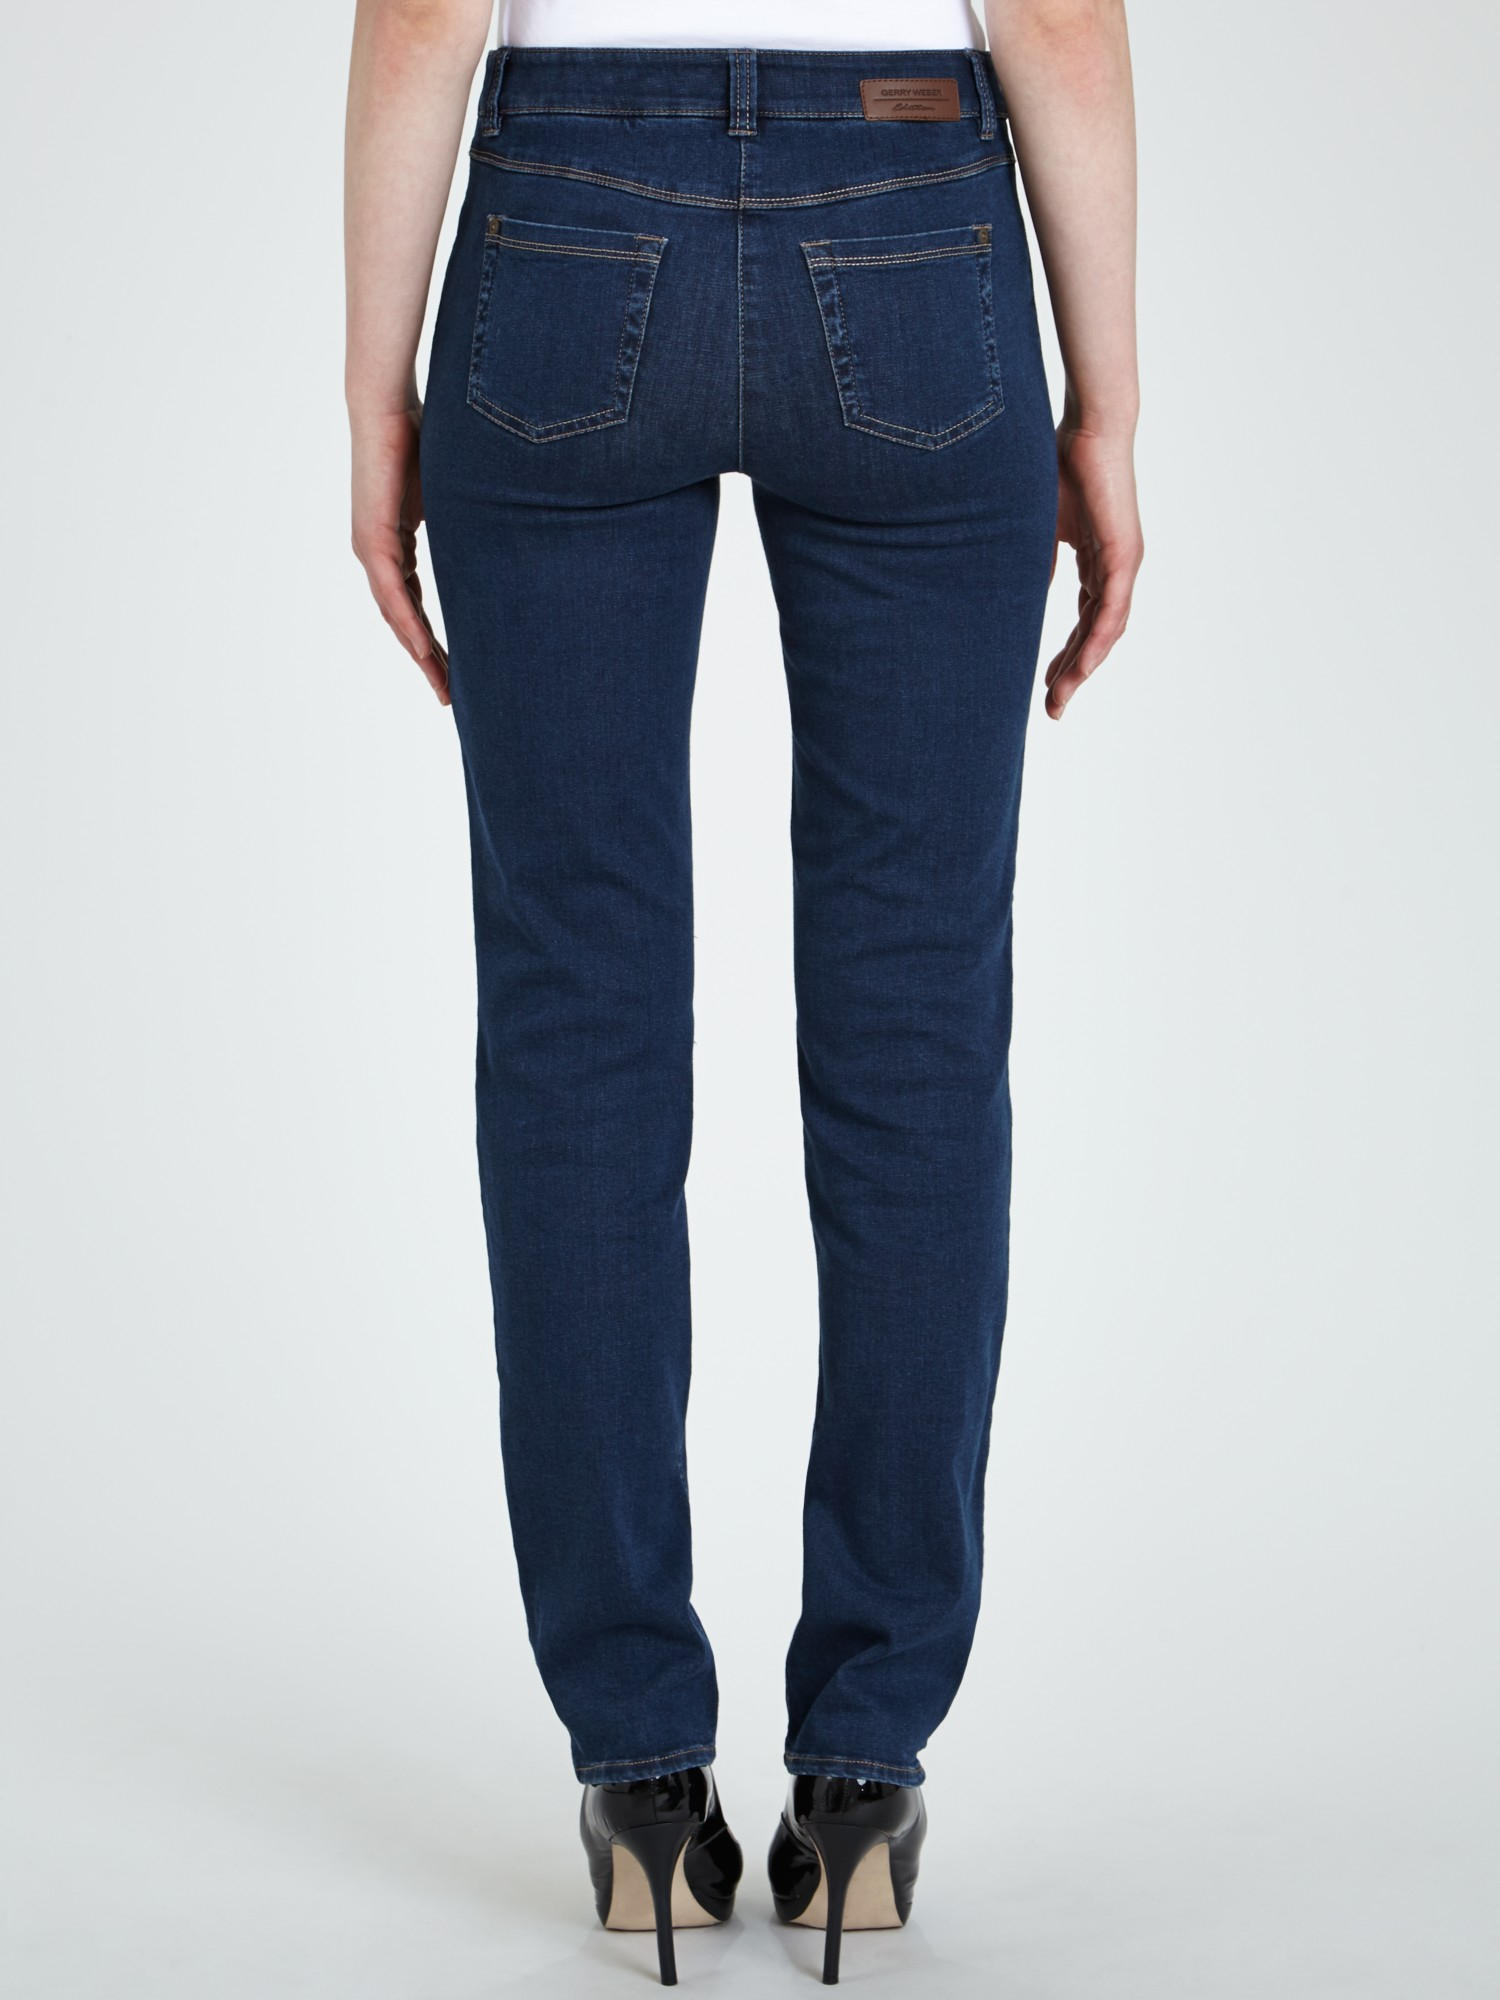 Gerry Weber Roxy Perfect Fit Jeans in Blue | Lyst UK